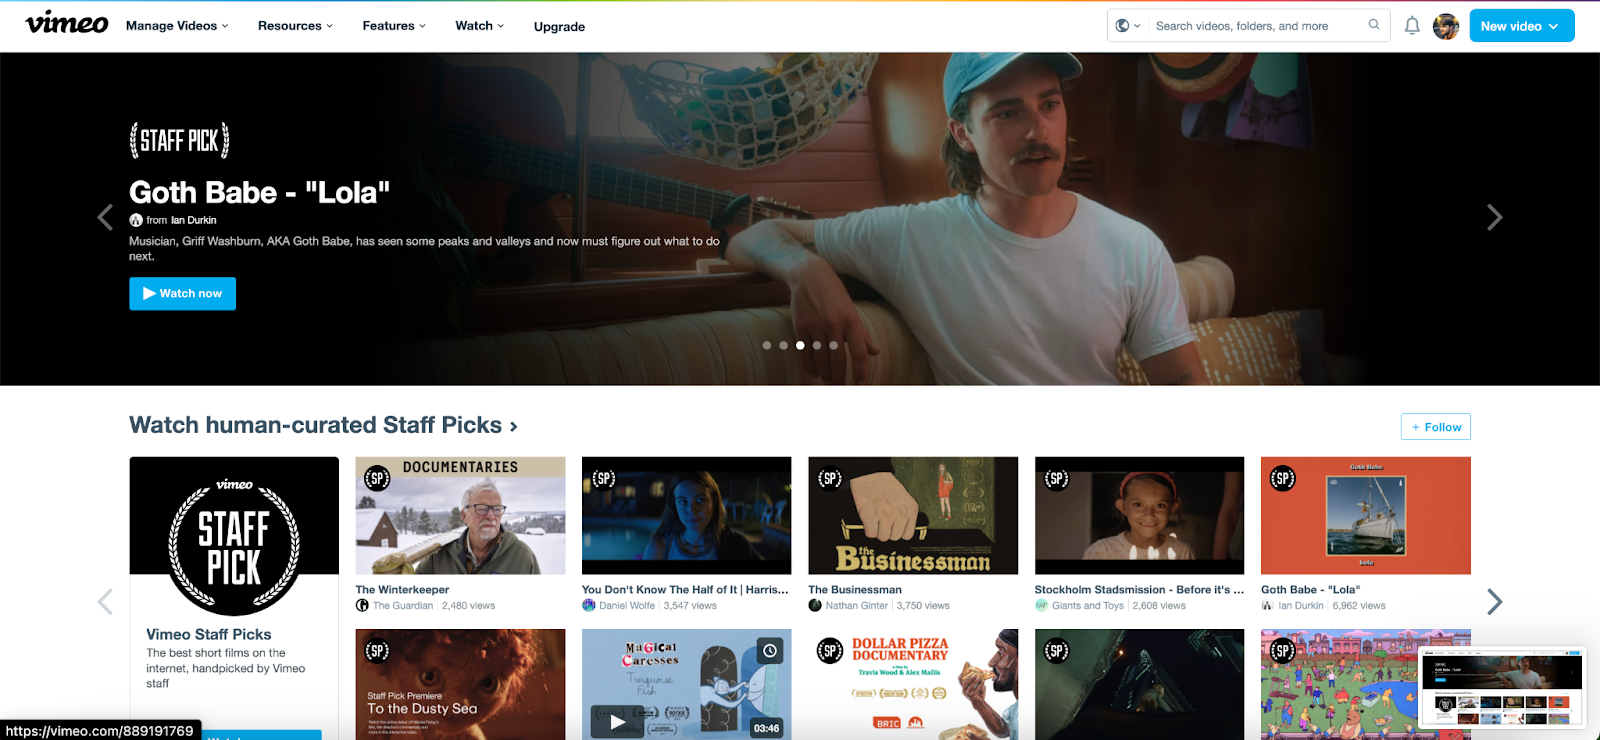 How to download Vimeo video